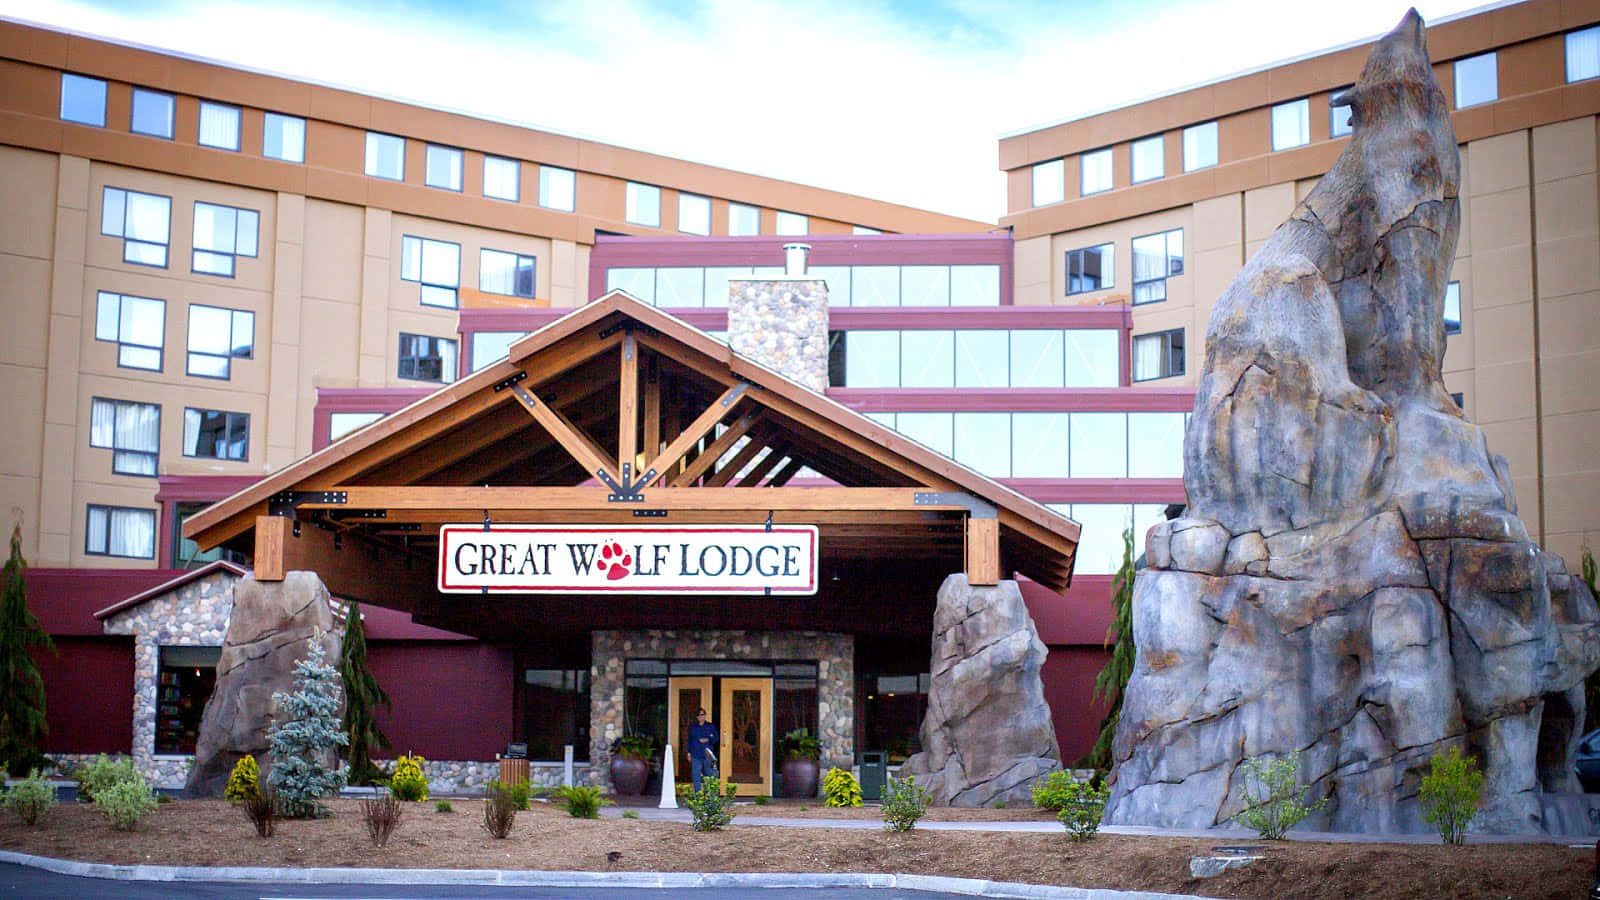 The Entrance To A Hotel With A Large Rock In Front